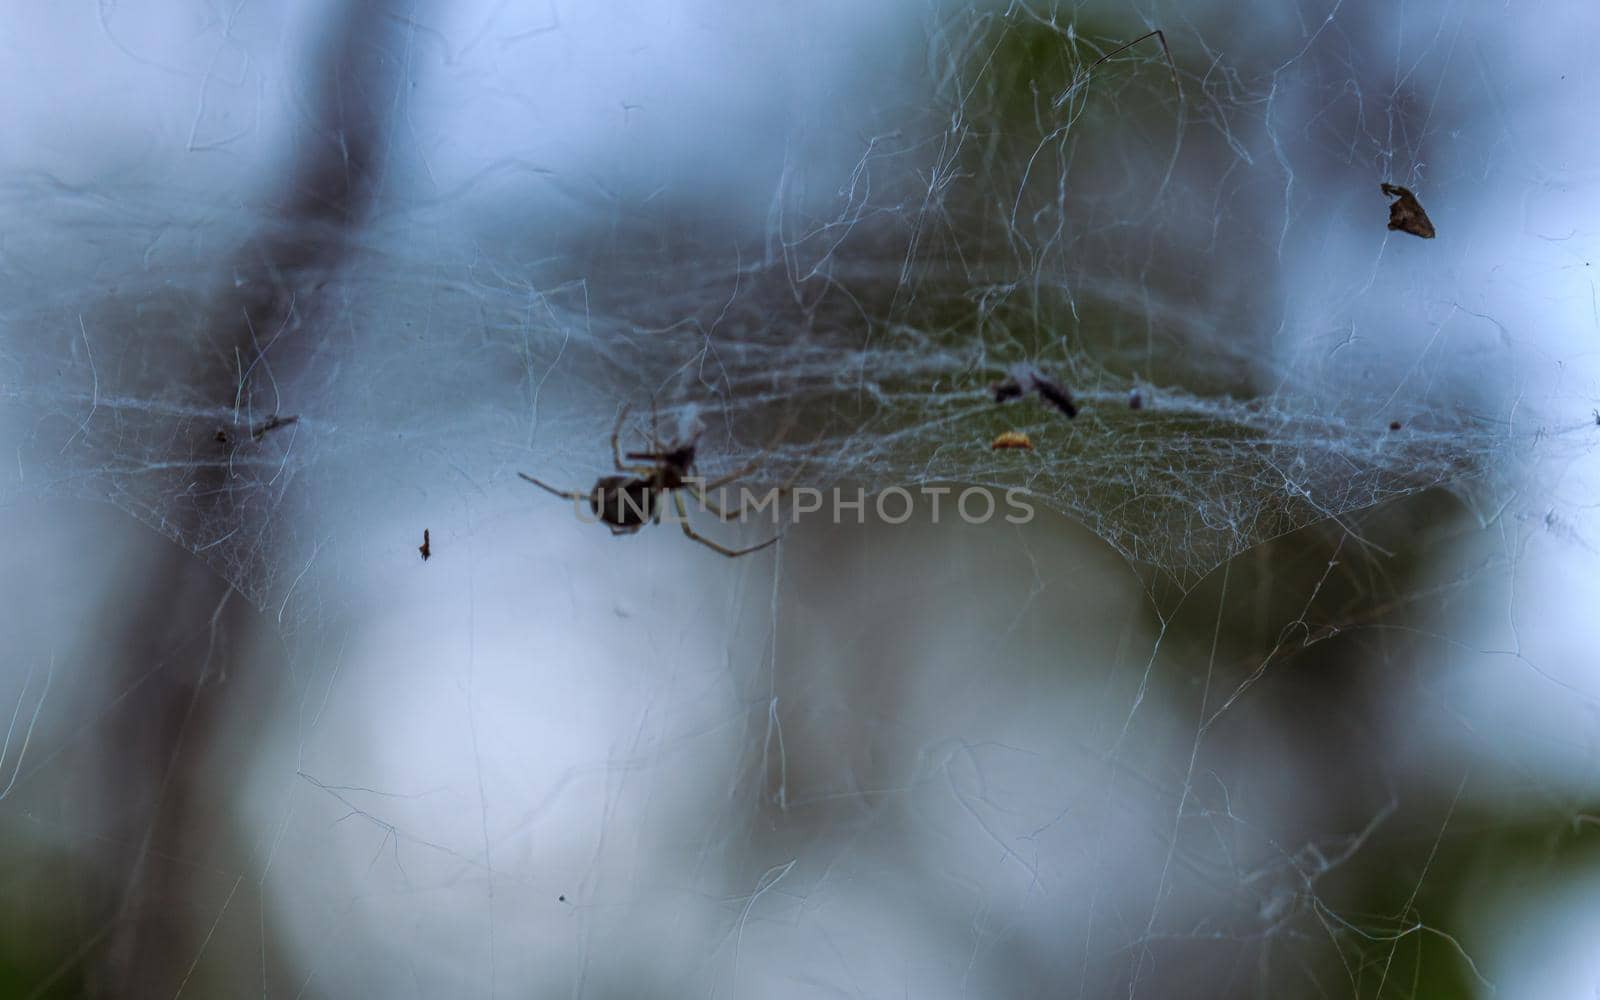 Spider made thread, transparent cobweb for insect food